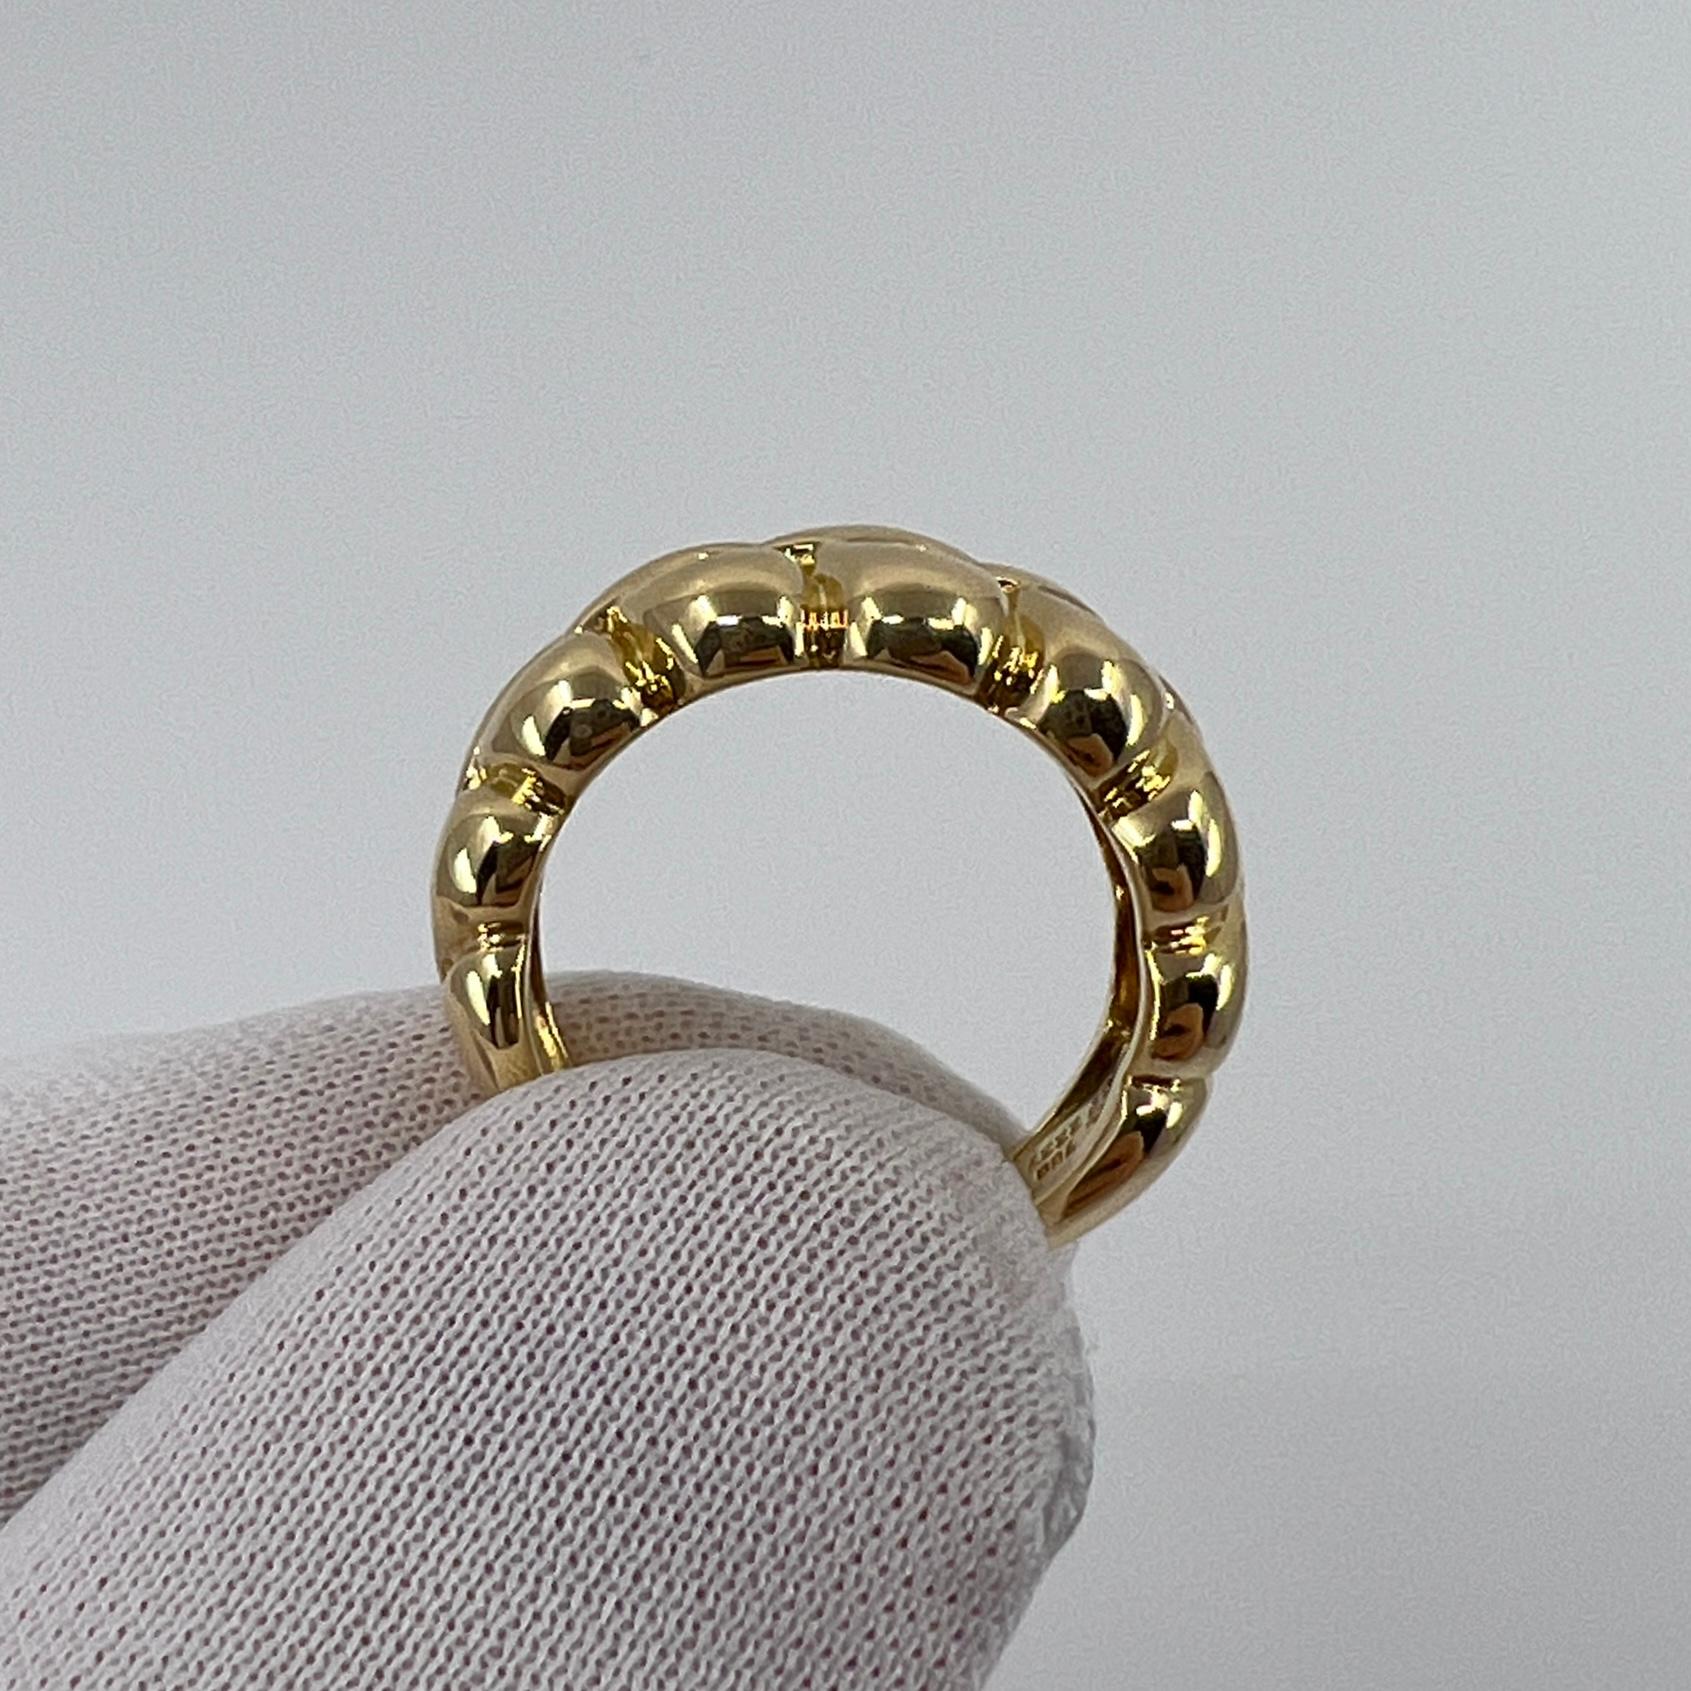 Rare Vintage Van Cleef & Arpels 18k Yellow Gold Open Heart Band Ring with Box For Sale 4